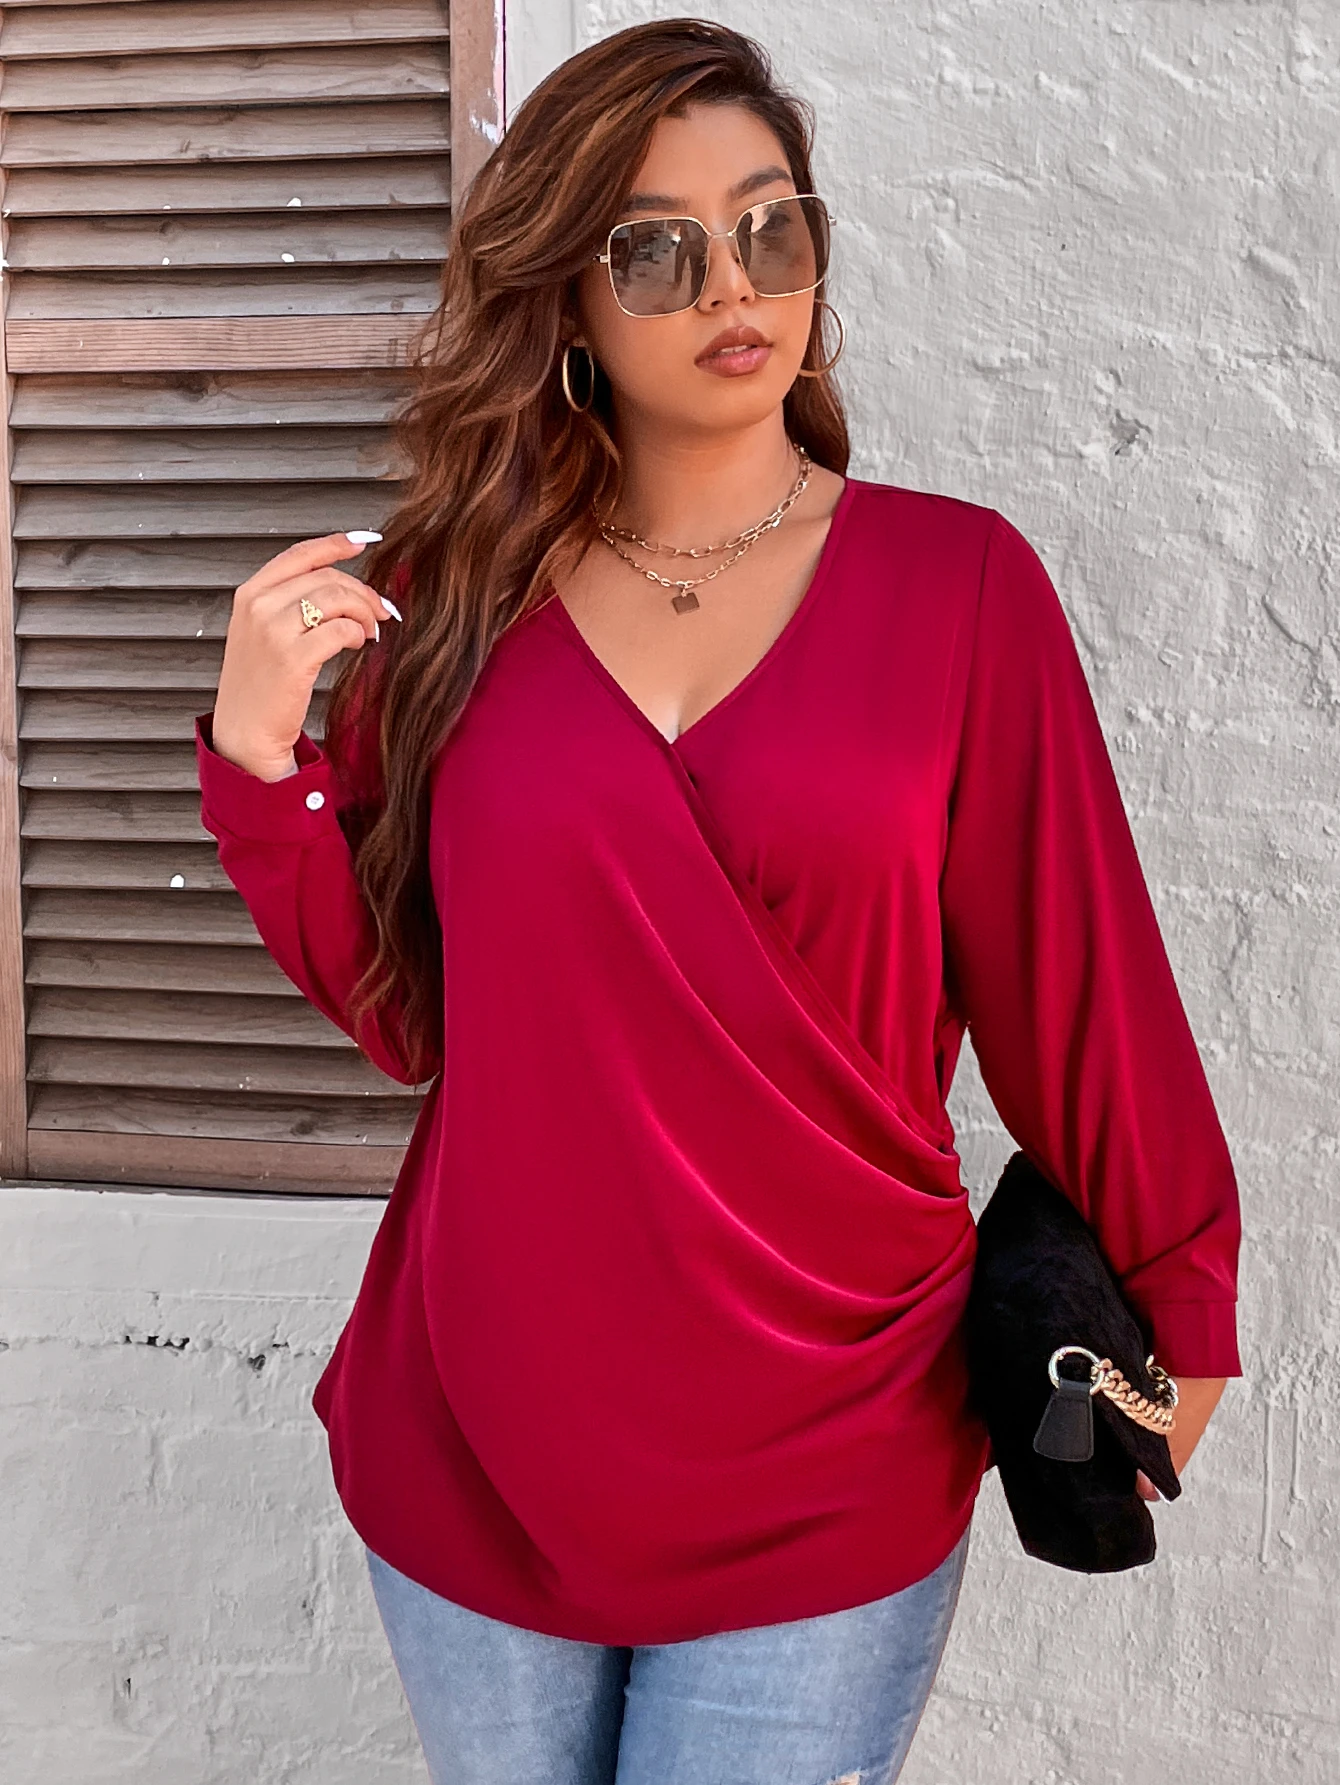 Plus Size 4XL Blouse Women's Fashion 2022 Autumn Red Elegant Oversized Loose Curvy Tops Long Sleeve Causal T Shirts Clothing